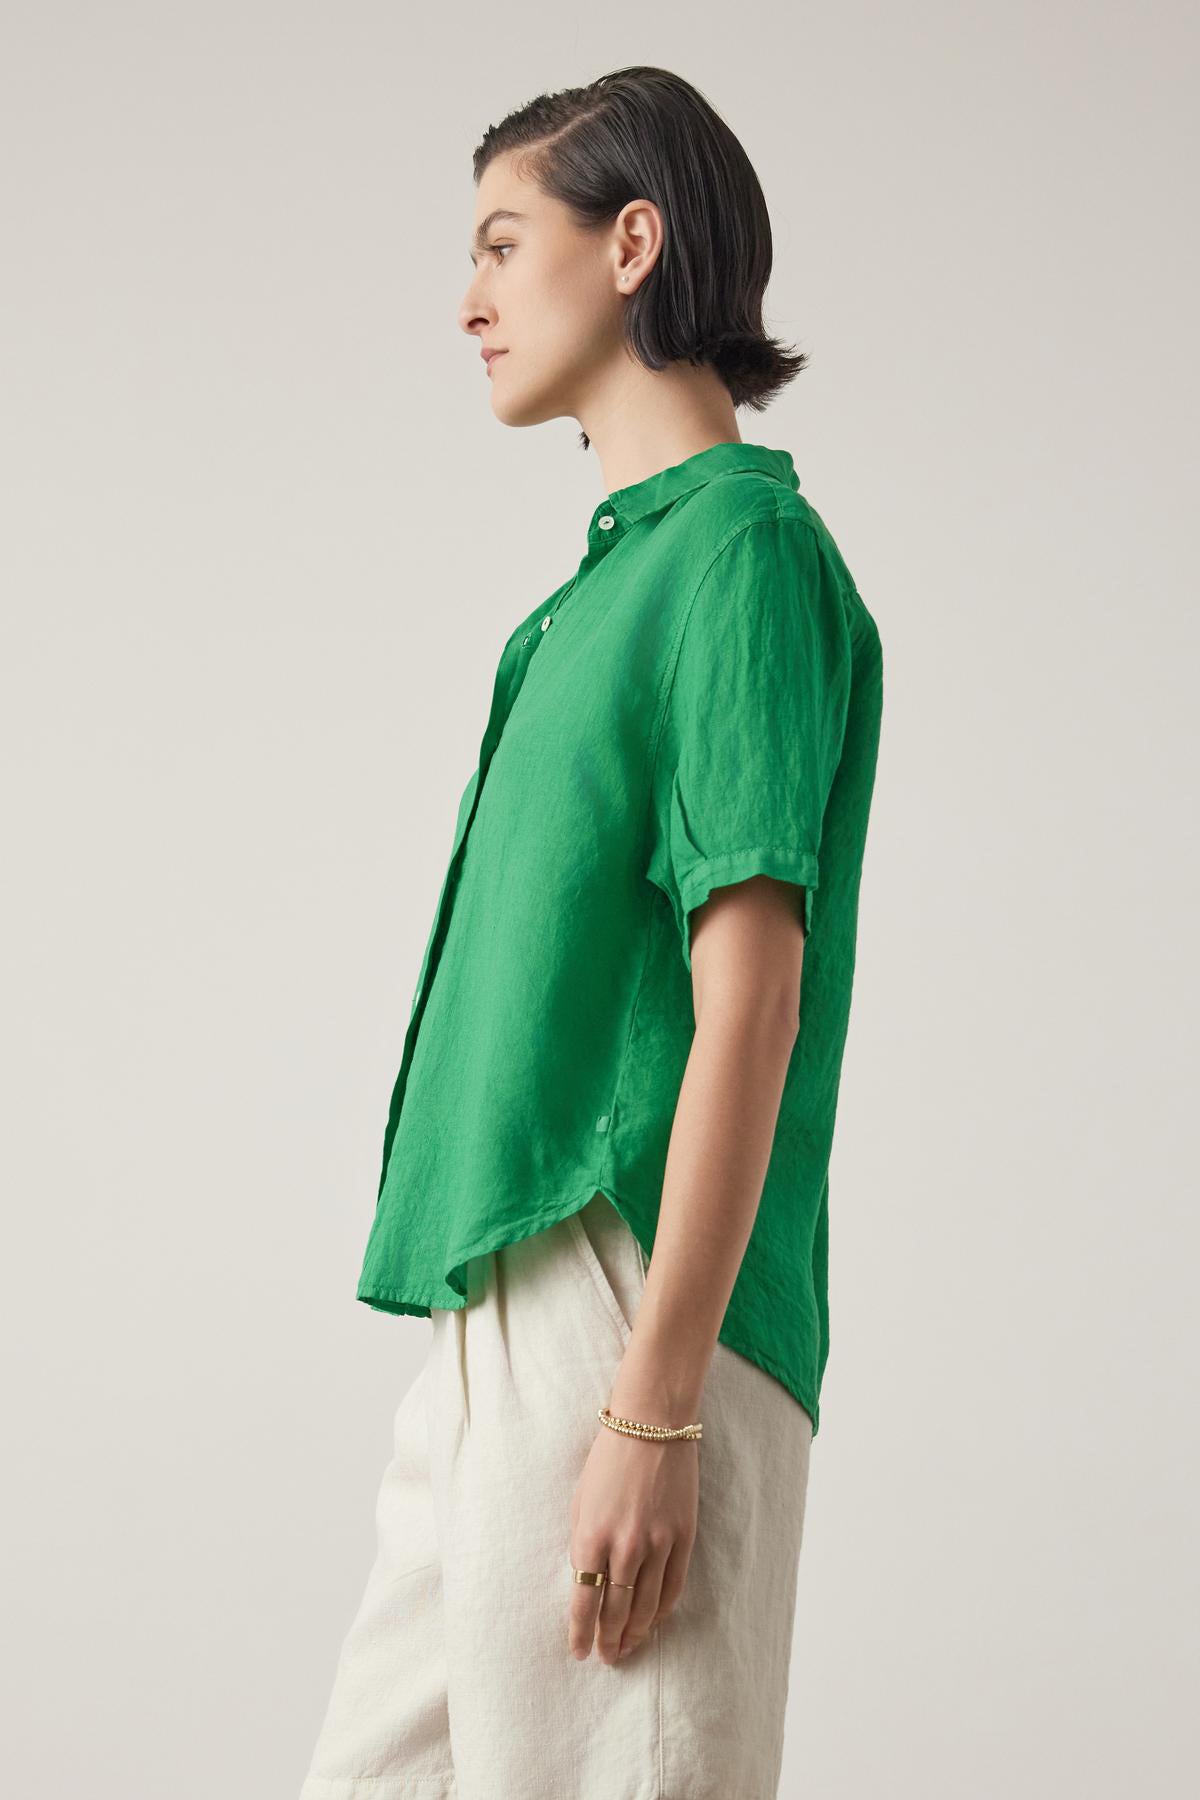 A person wearing a bright green short-sleeved Velvet by Jenny Graham Claremont linen shirt and cream pants, standing in profile against a neutral background.-36753623482561